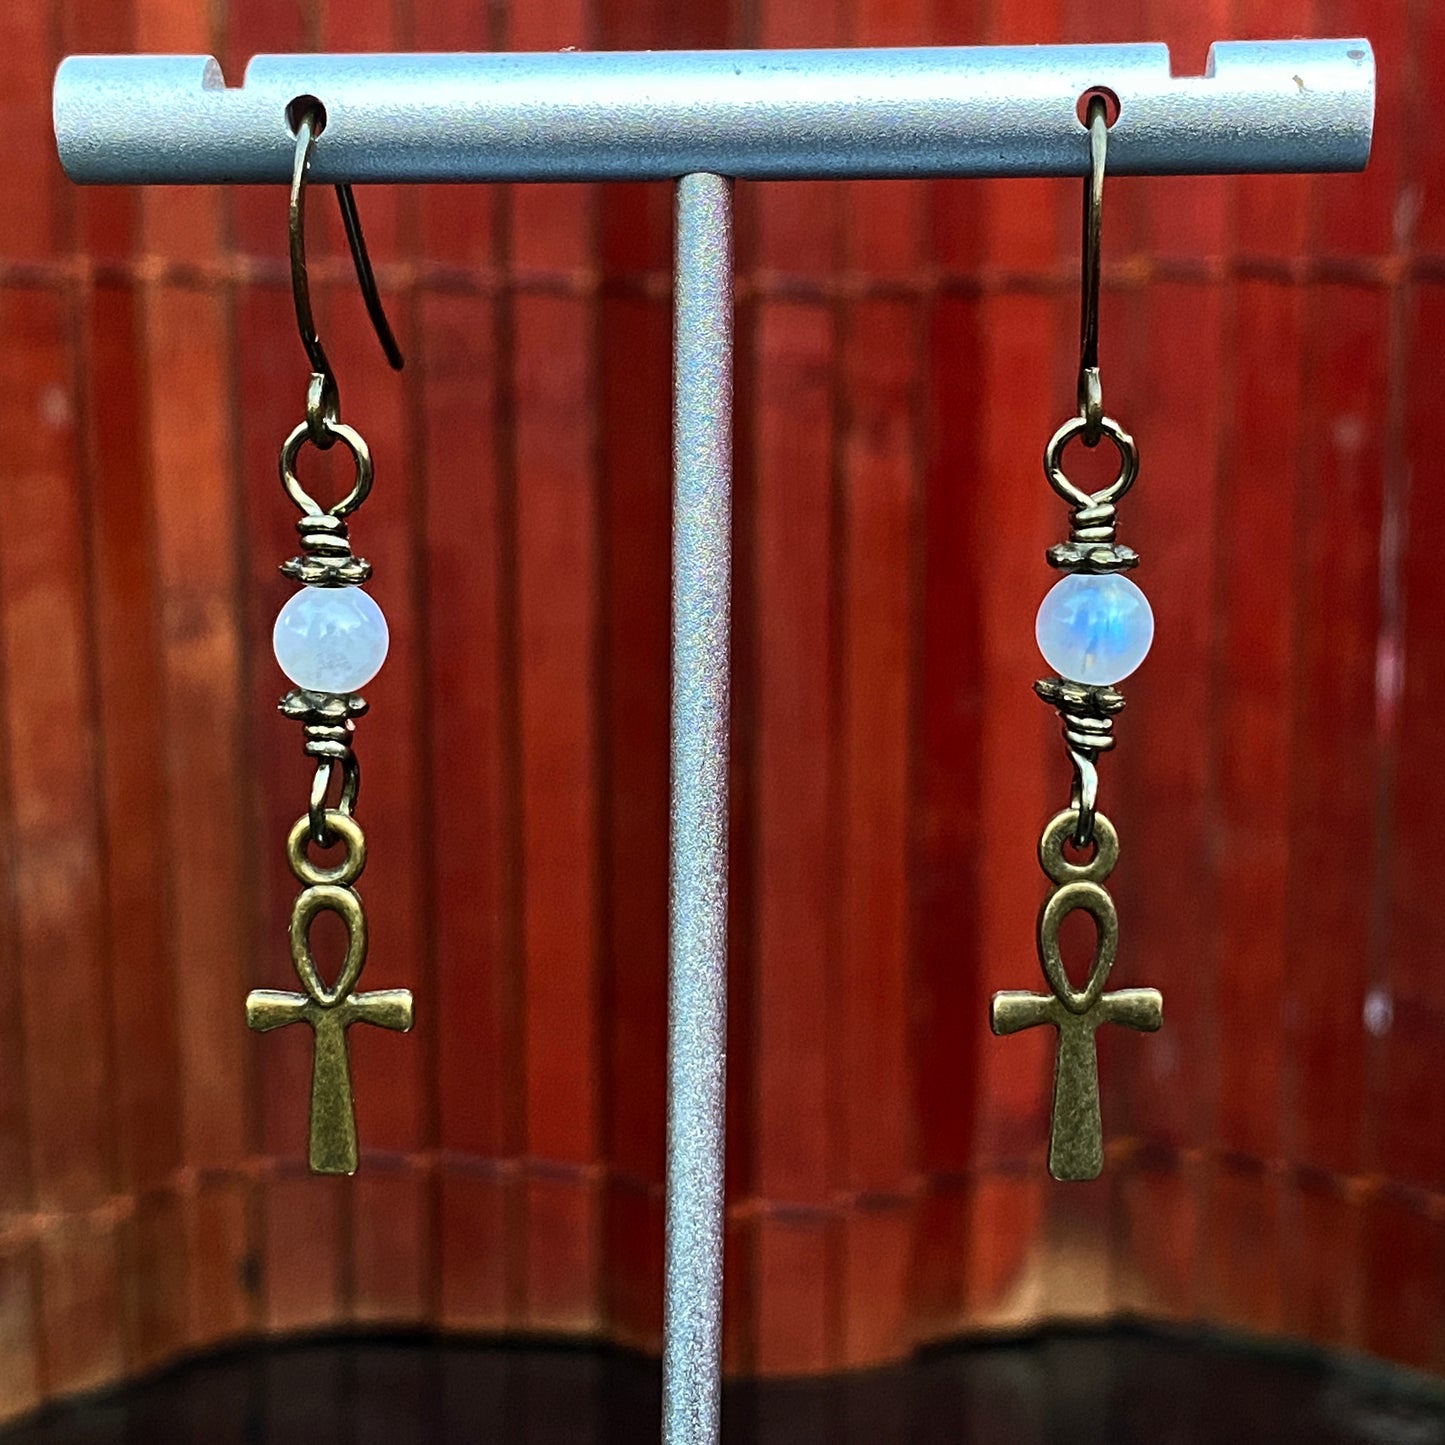 Moonstone and Ankh Earrings